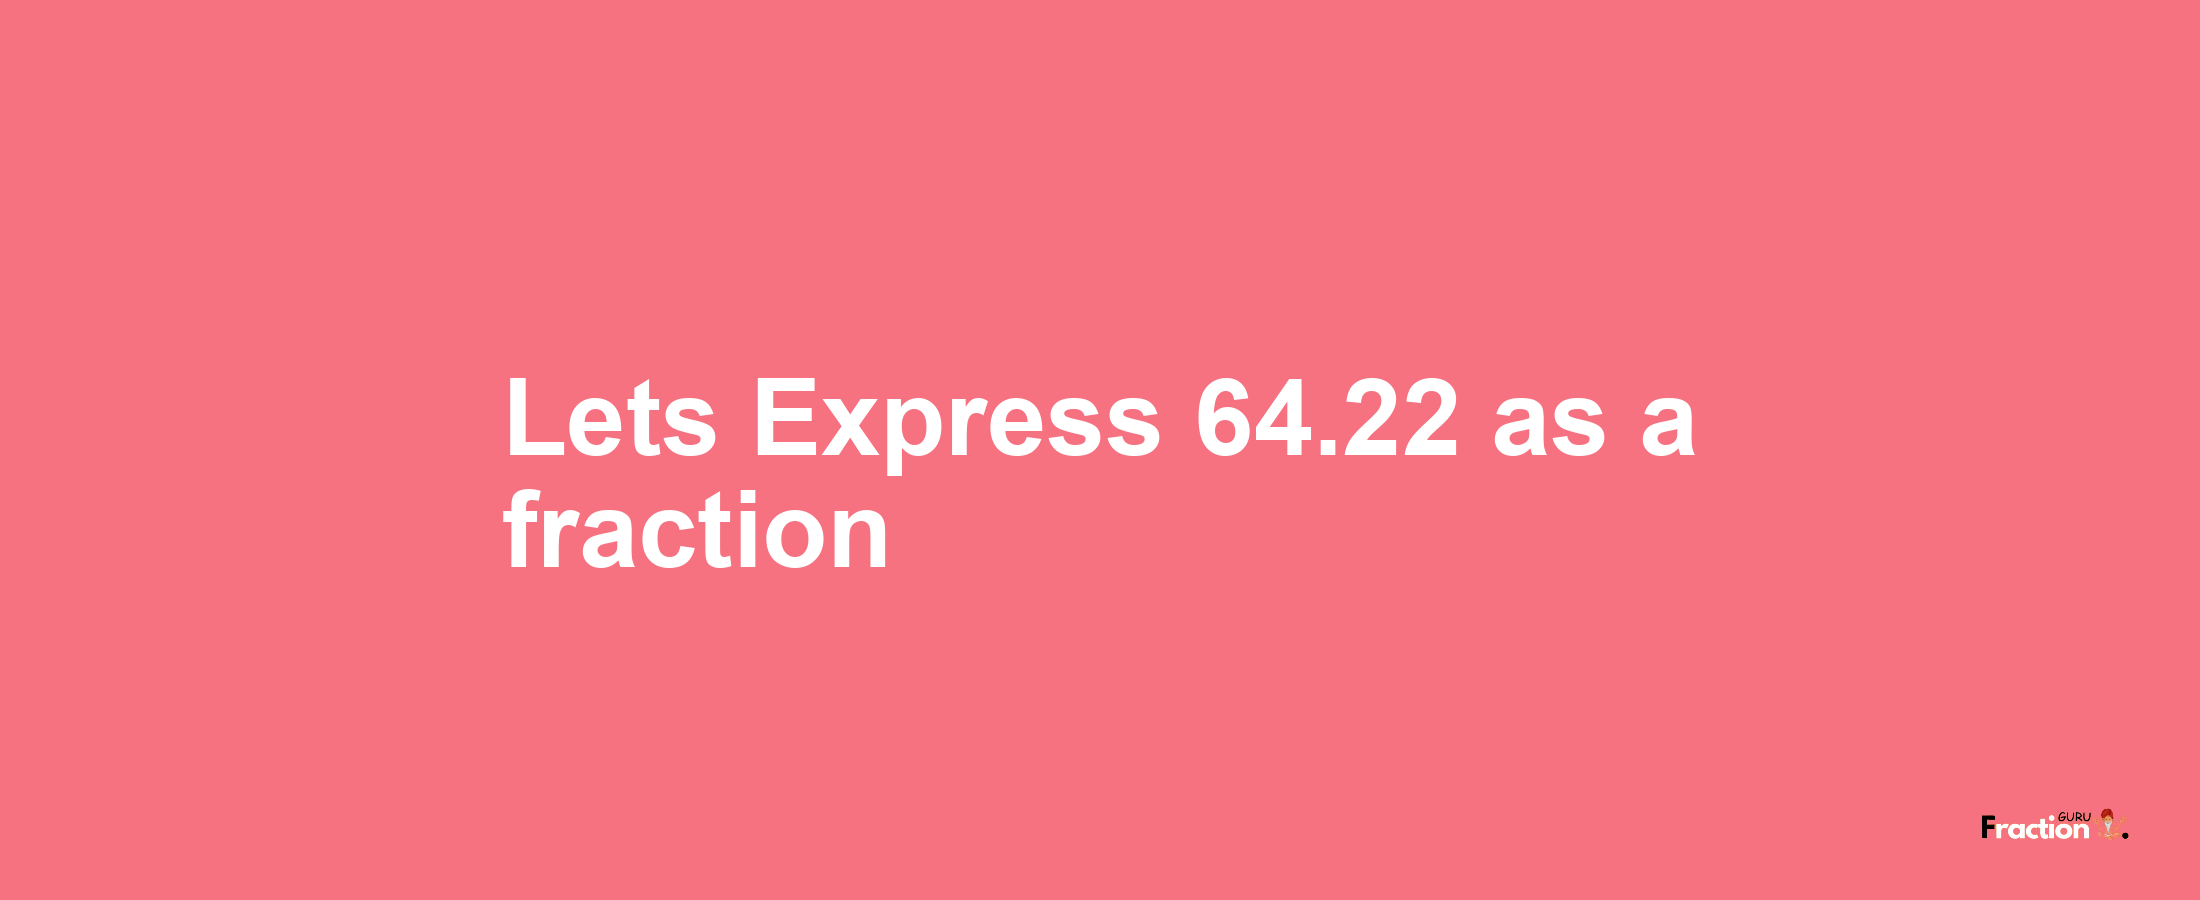 Lets Express 64.22 as afraction